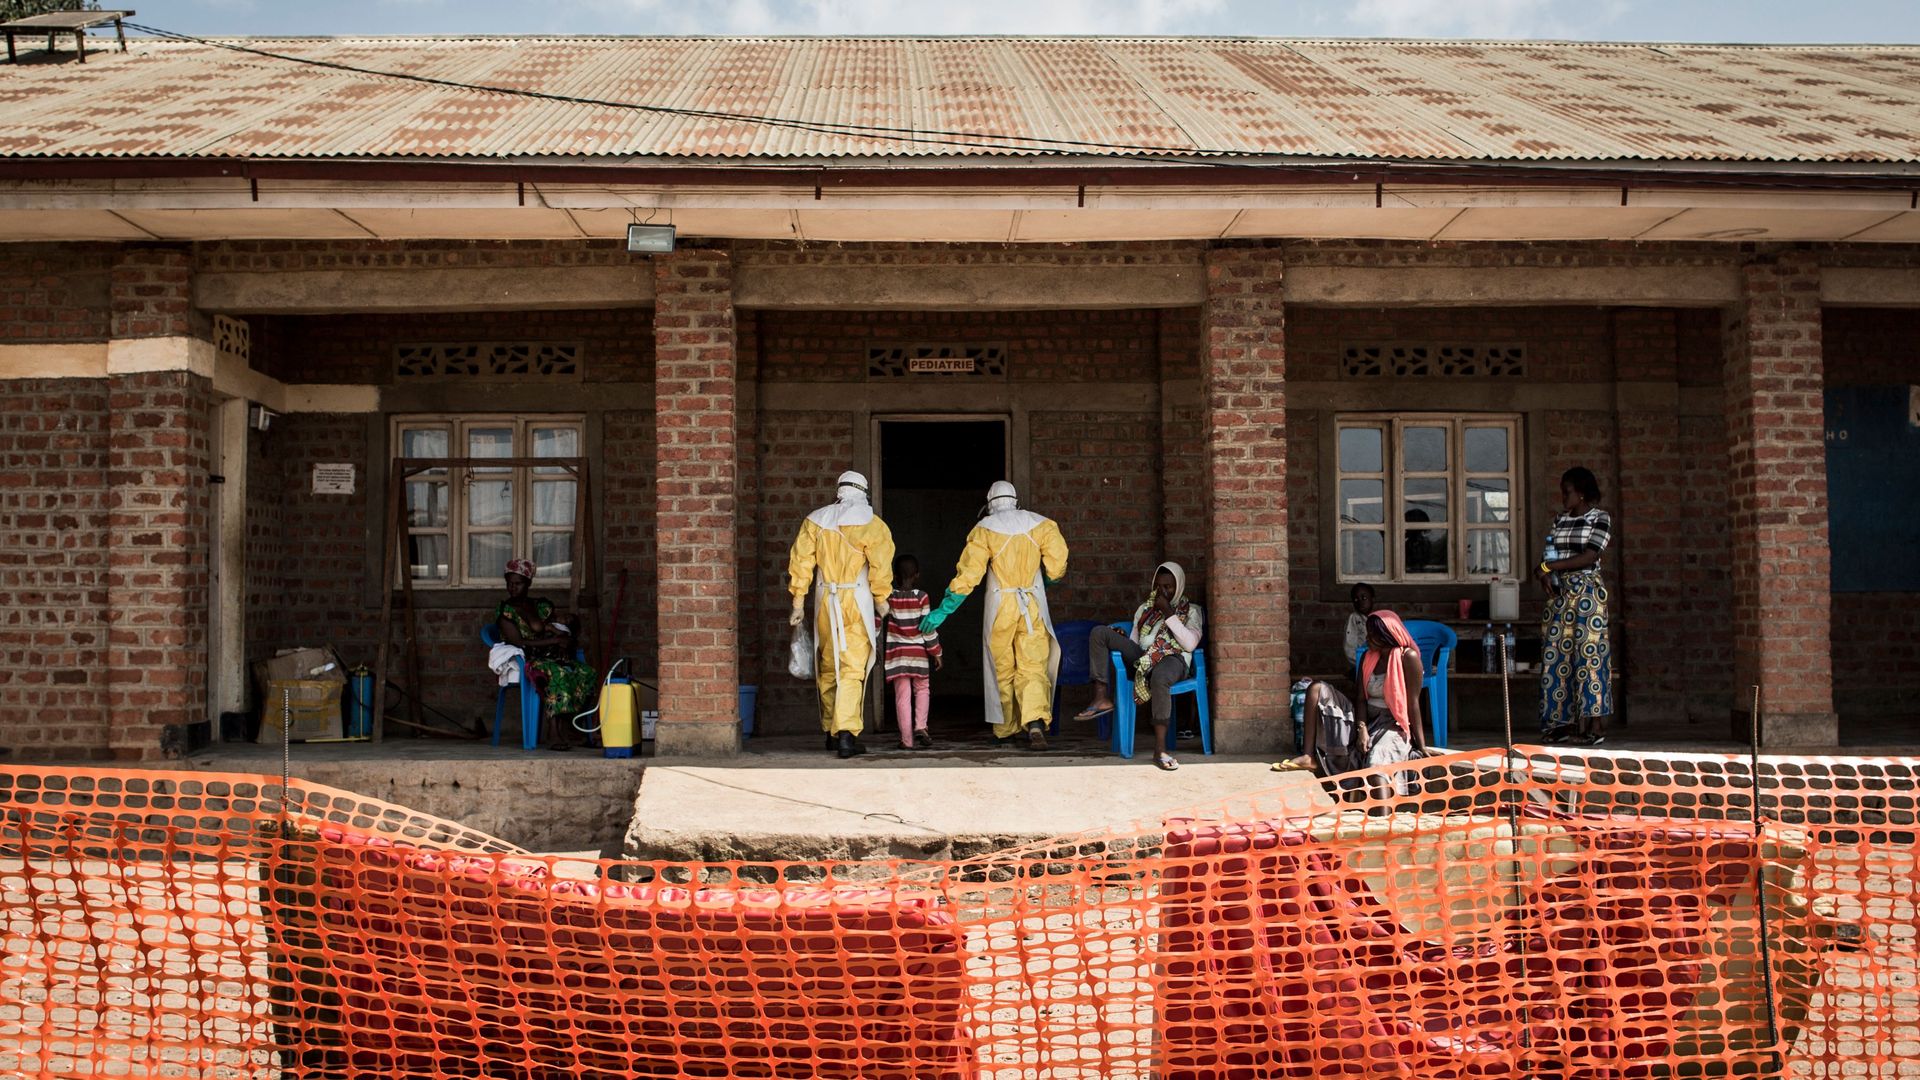 Photo of child, who's suspected of being infected with Ebola, being led by the hand into a building in DRC